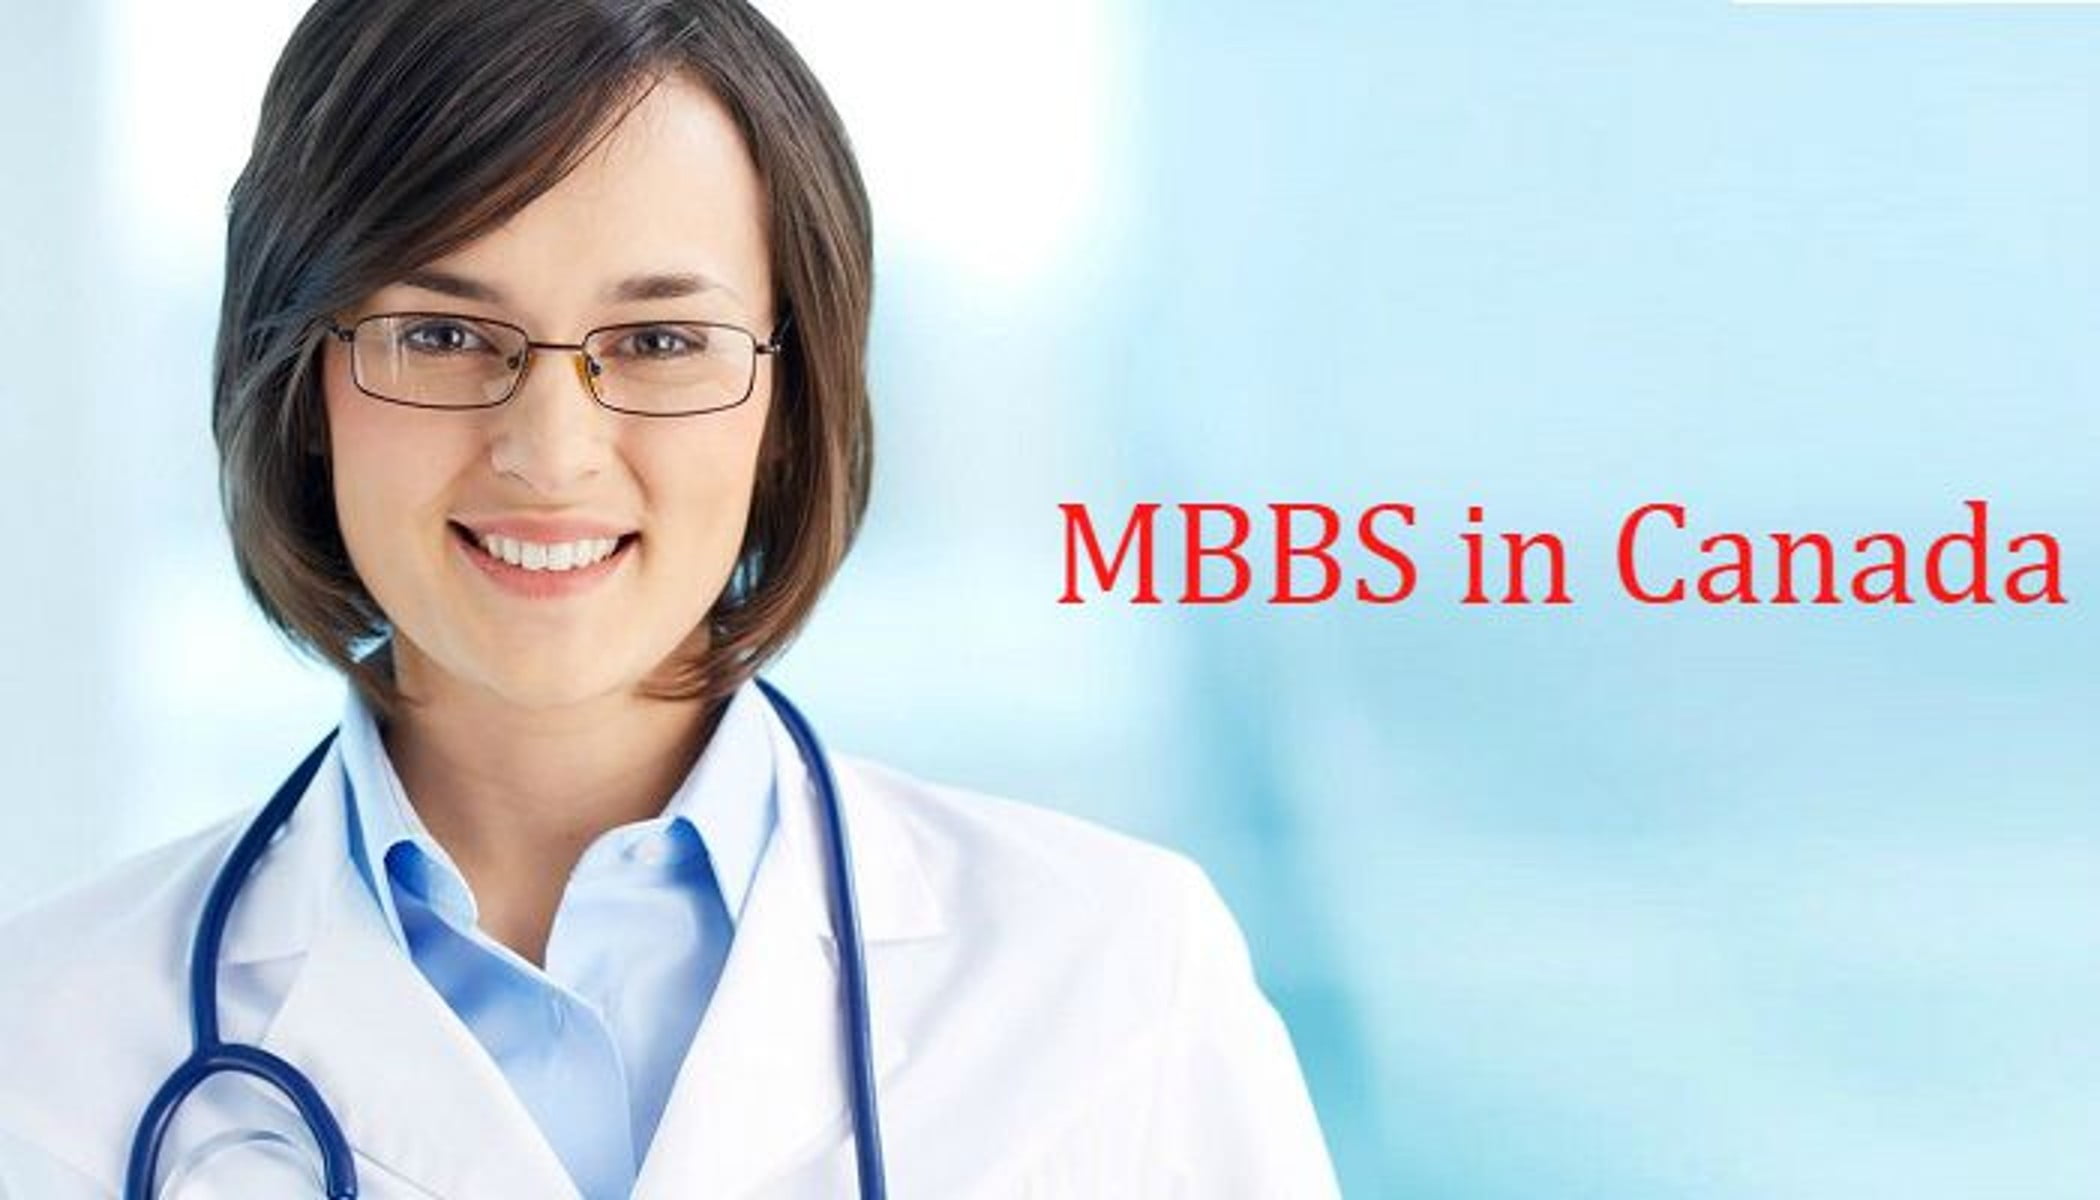 MBBS In Canada: Entry Requirements, Free Tuition, Scholarships